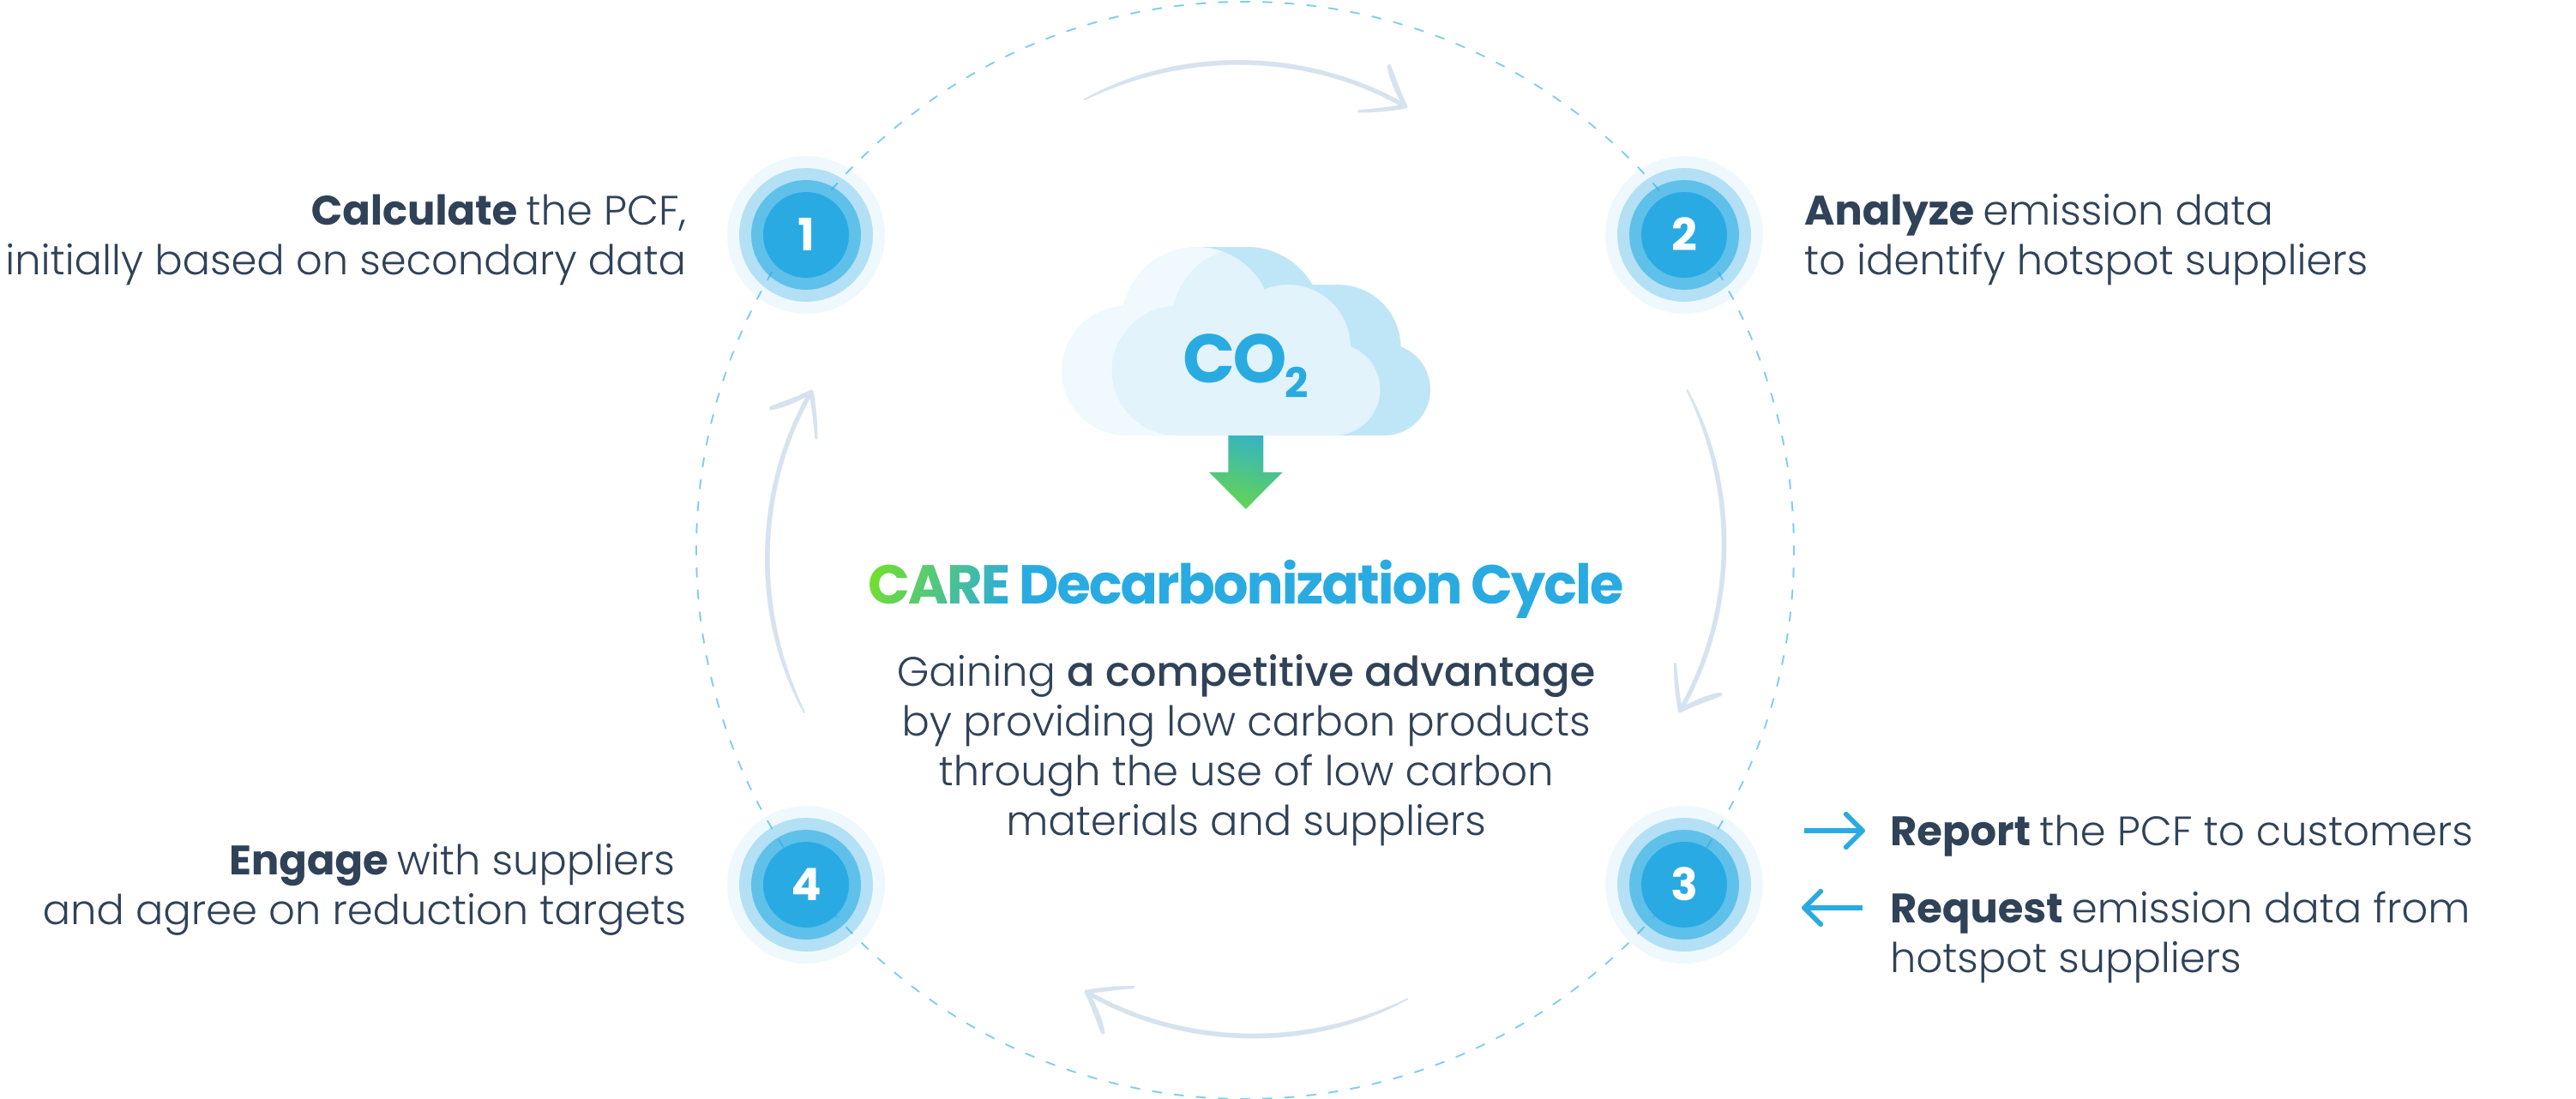 CARE Decarbonization Cycle